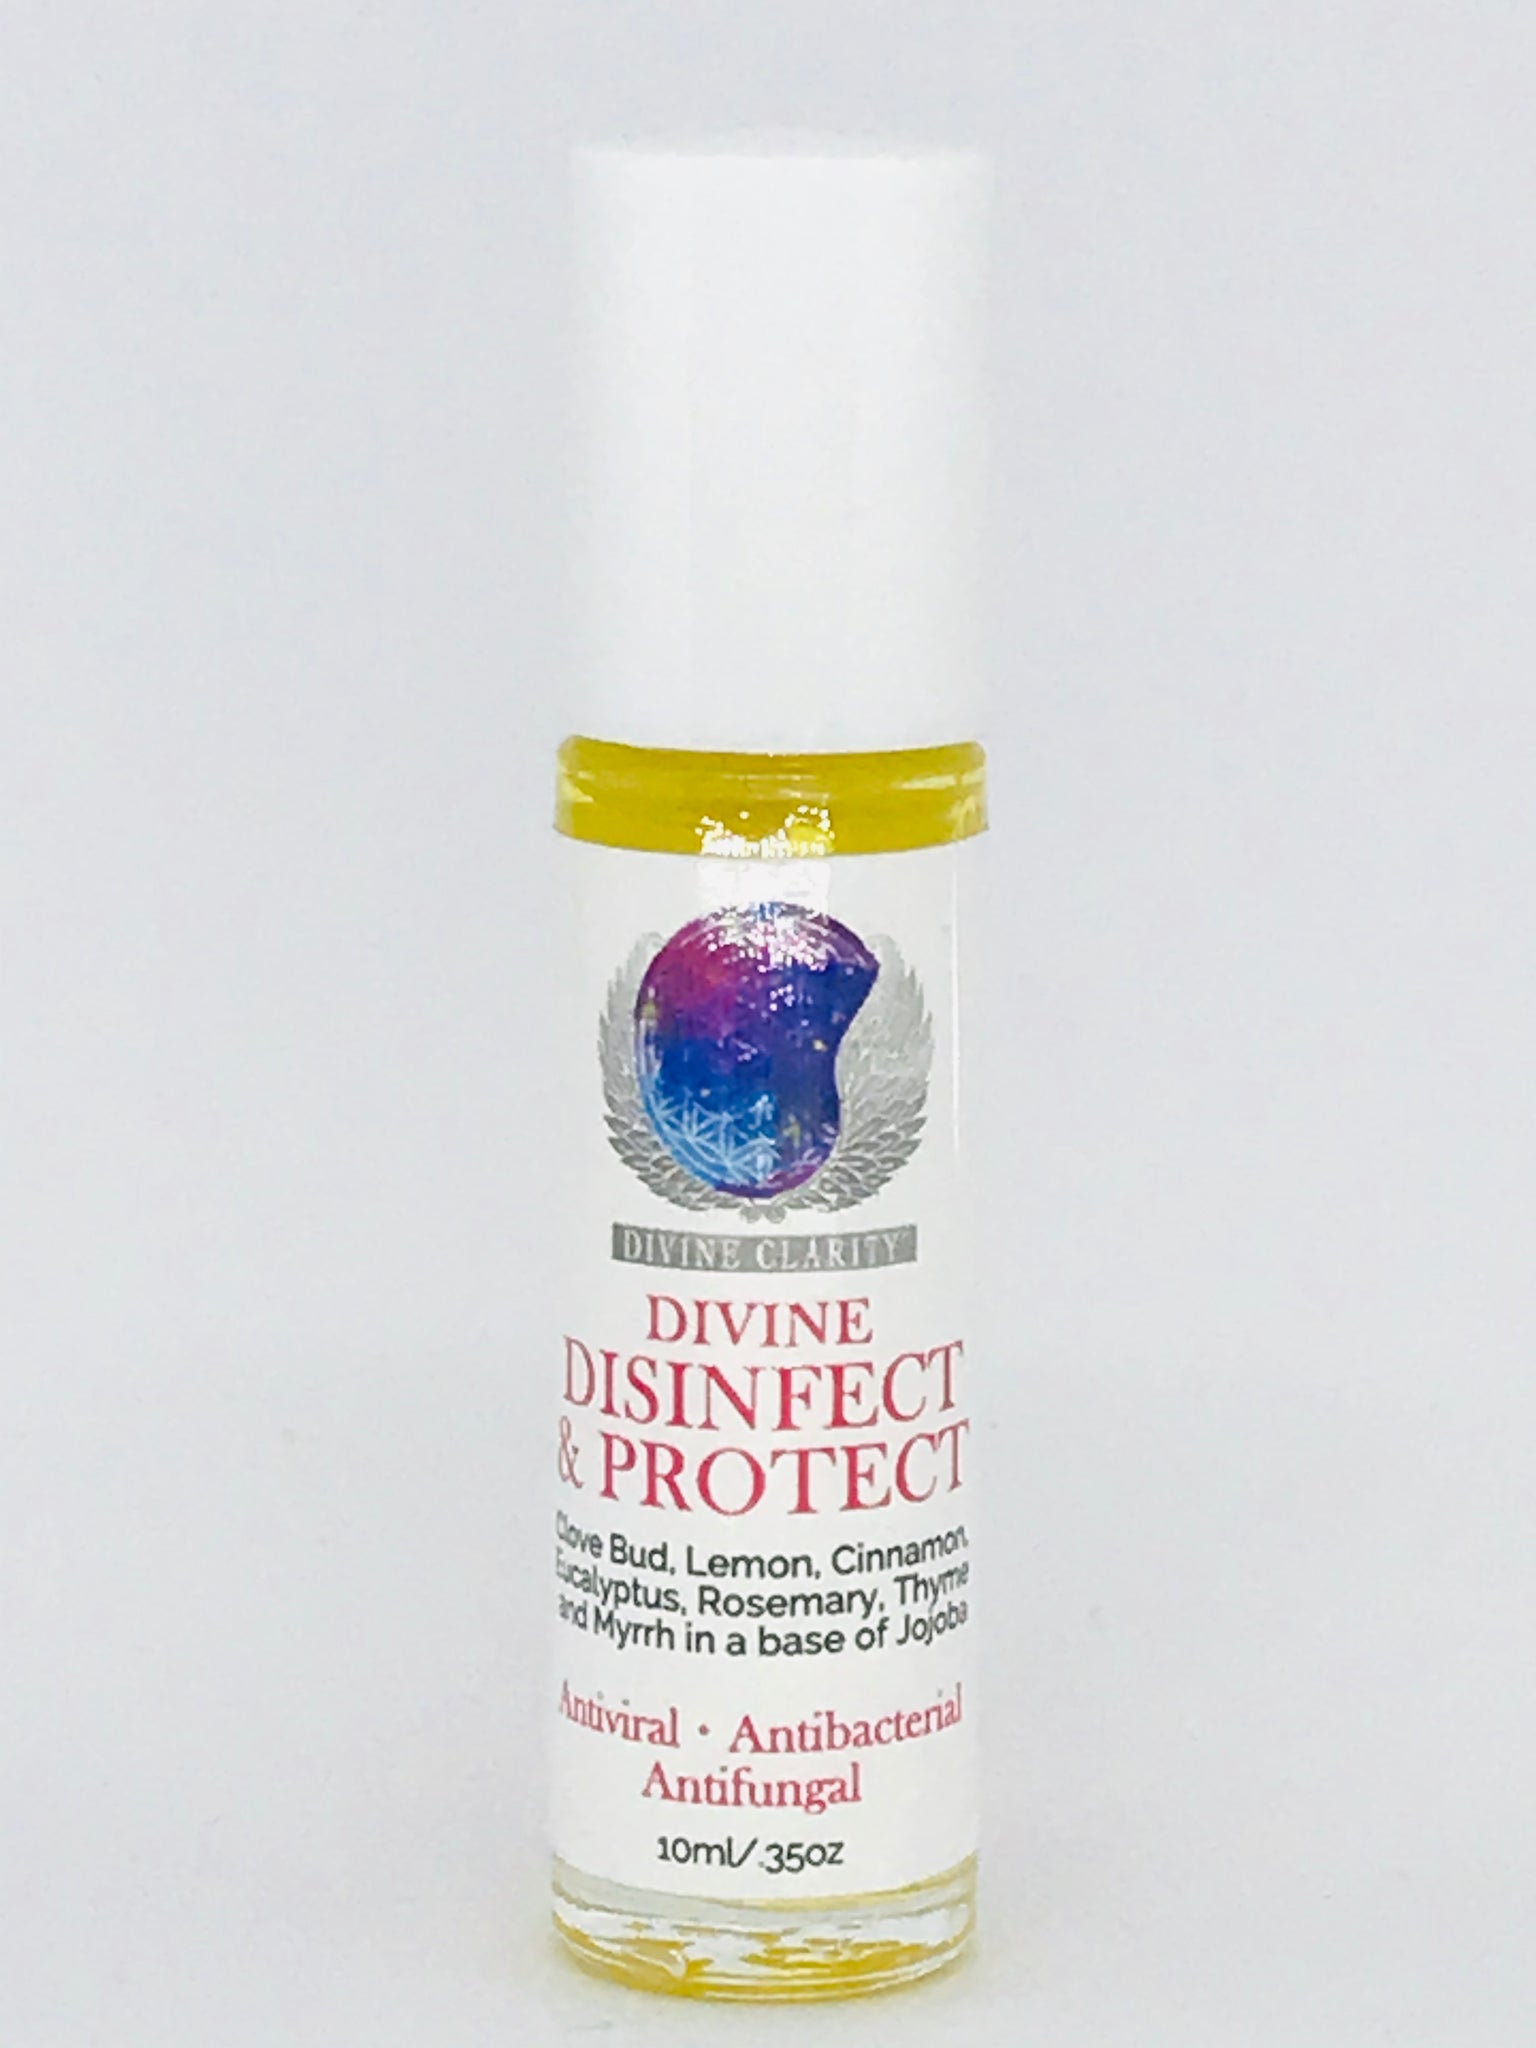 Divine Disinfect & Protect Vibrational Essence Roll On - Divine Clarity